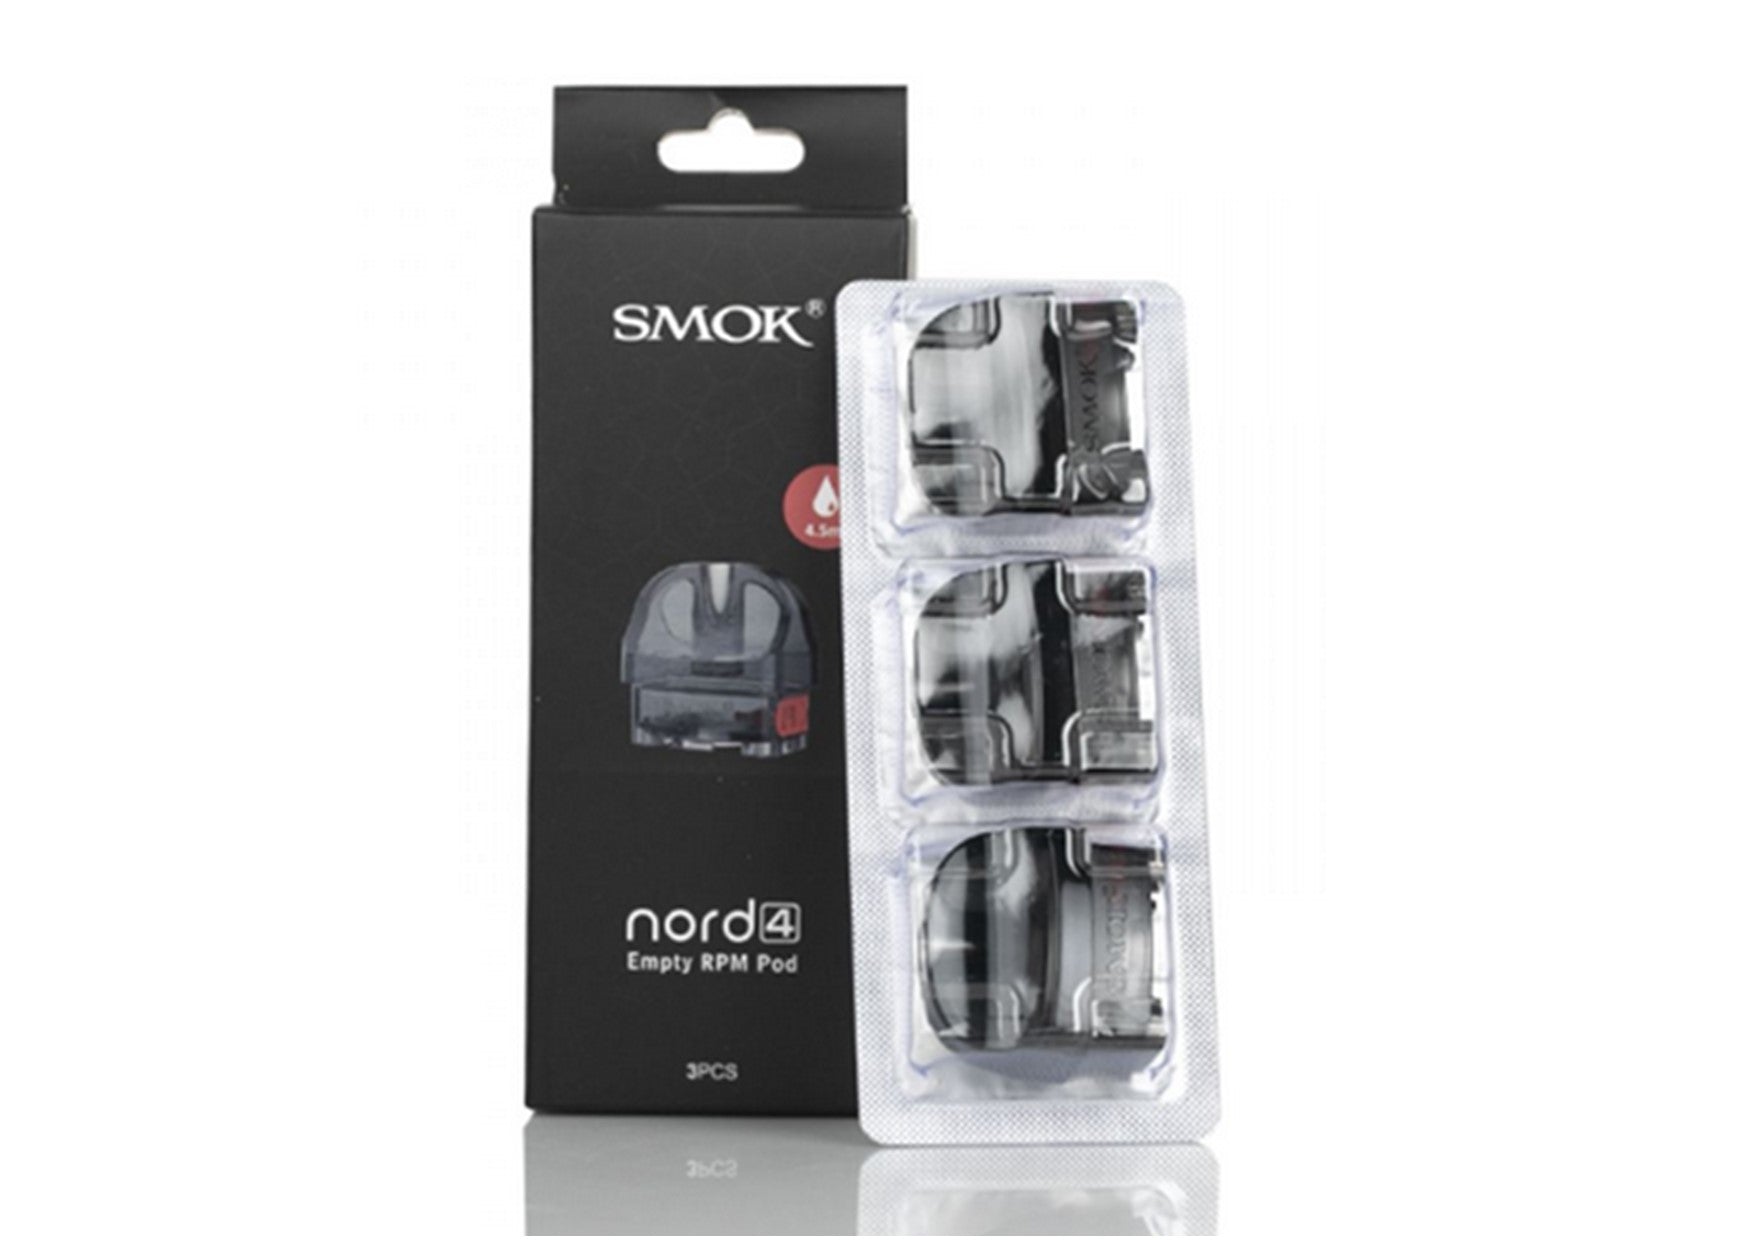 SMOK | Nord 4 RPM Replacement Pods